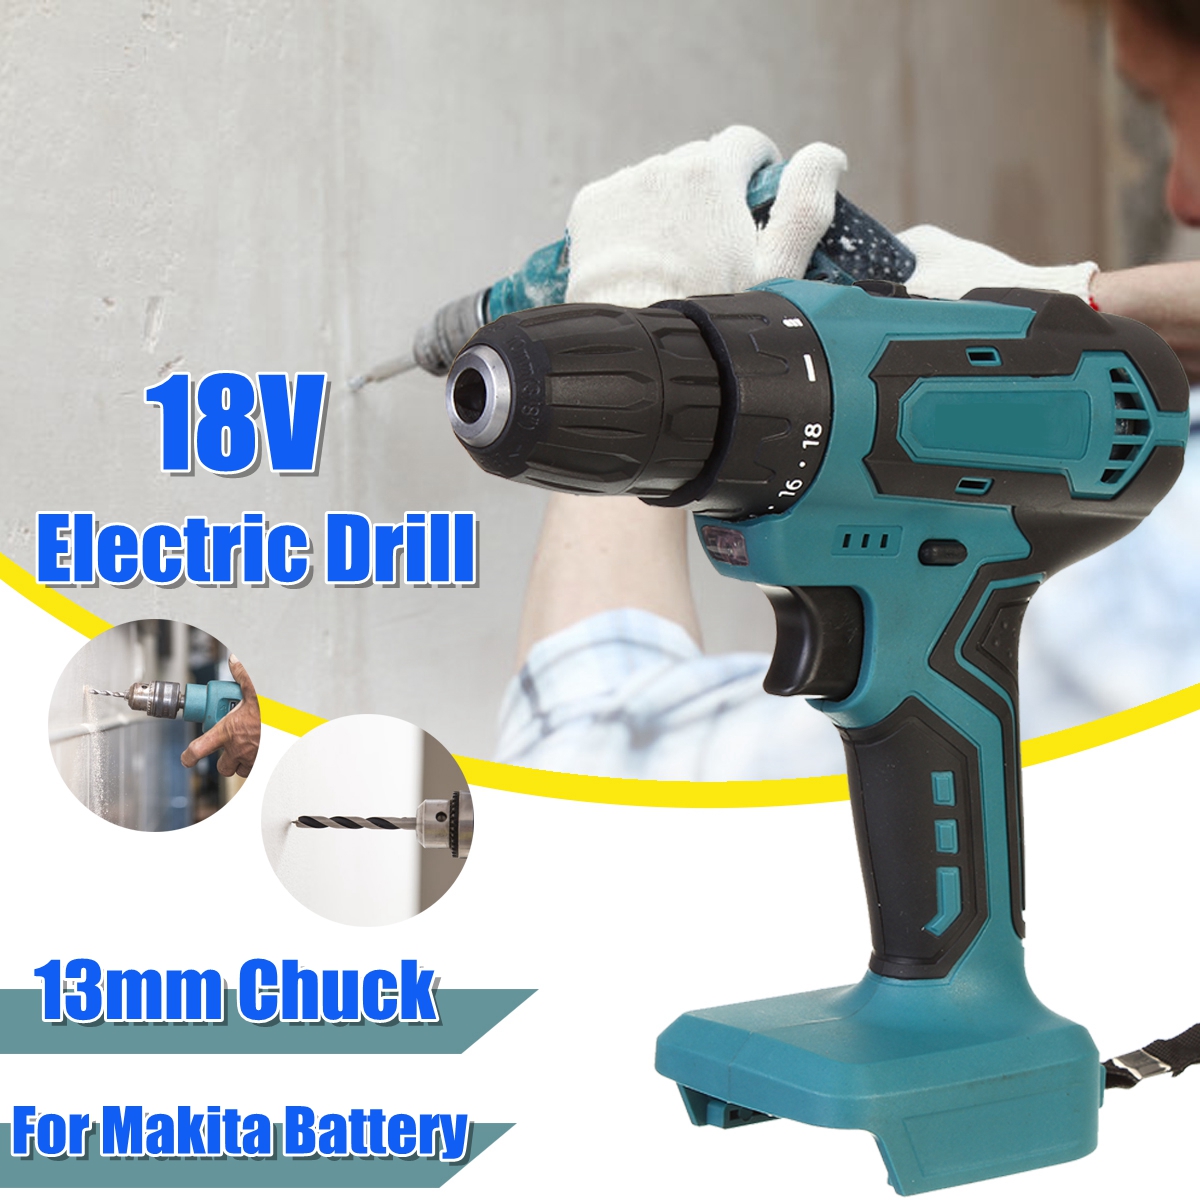 18V-13mm-Cordless-Electric-Drill-2-Speed-Screwdriver-For-Makita-Battery-1717184-2